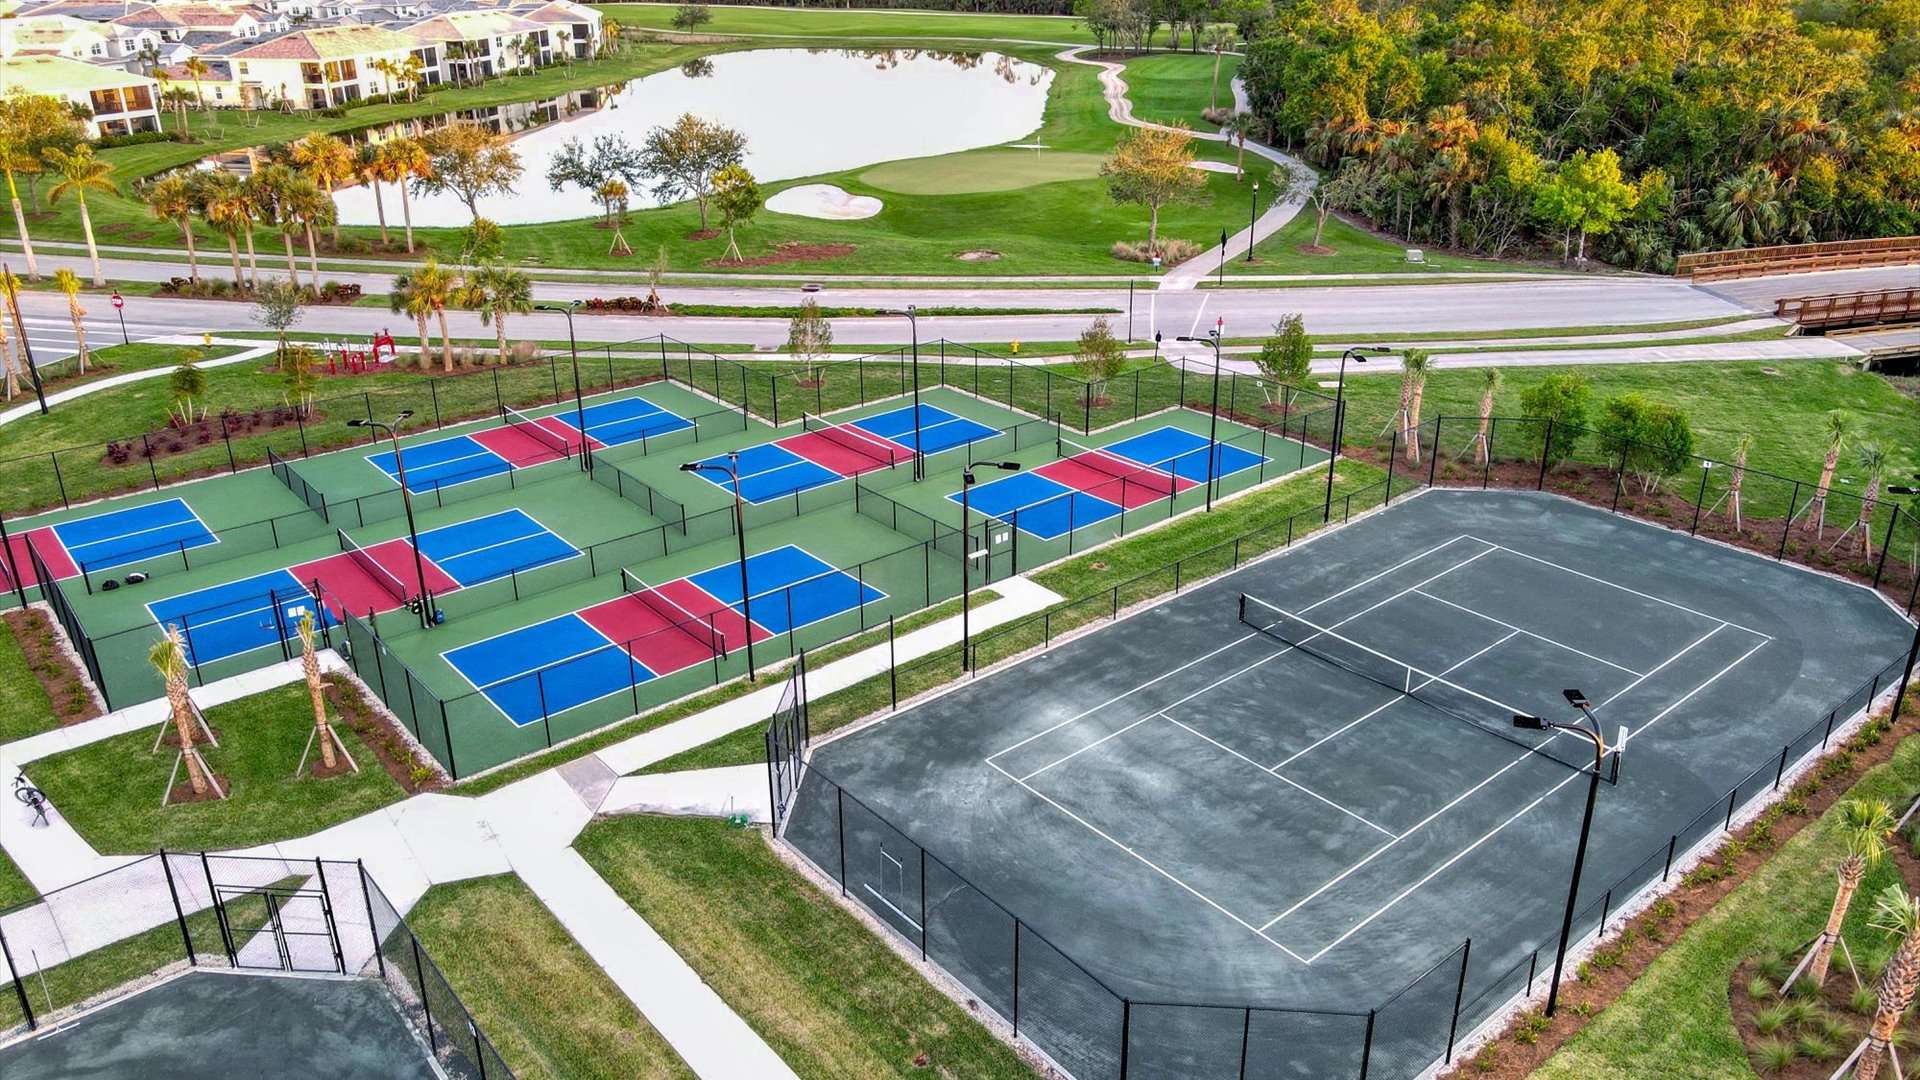 Heritage Landing Tennis, Pickleball, and shuffleboard courts